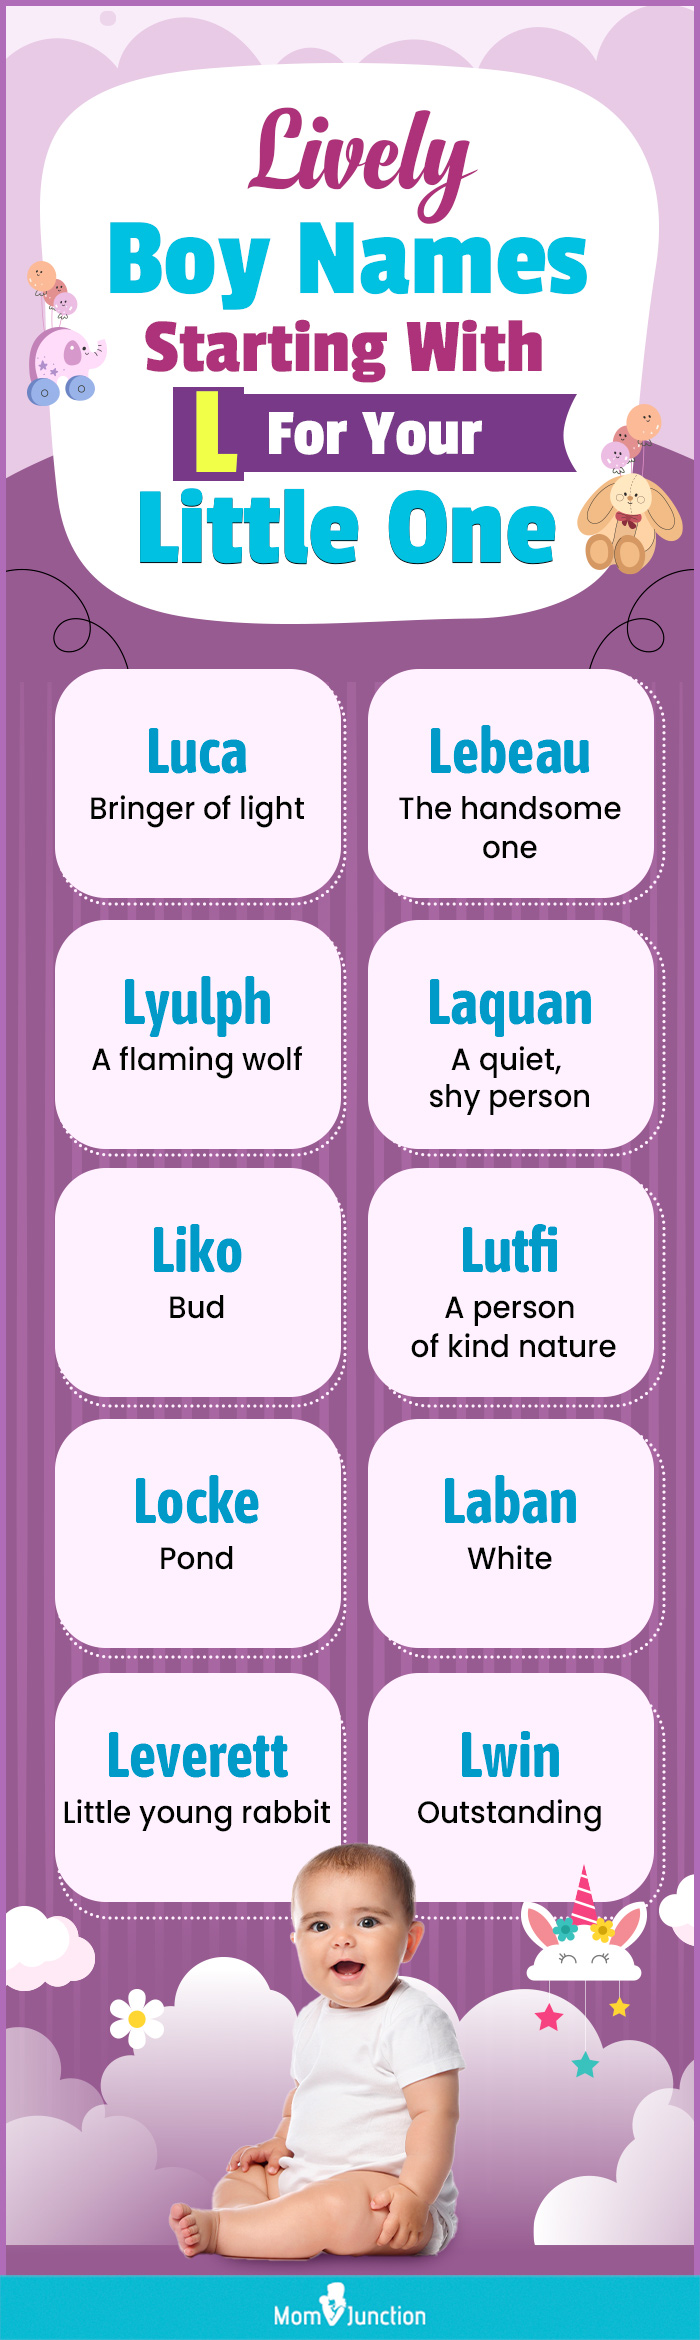 lively boy names starting with l for your little one (infographic)